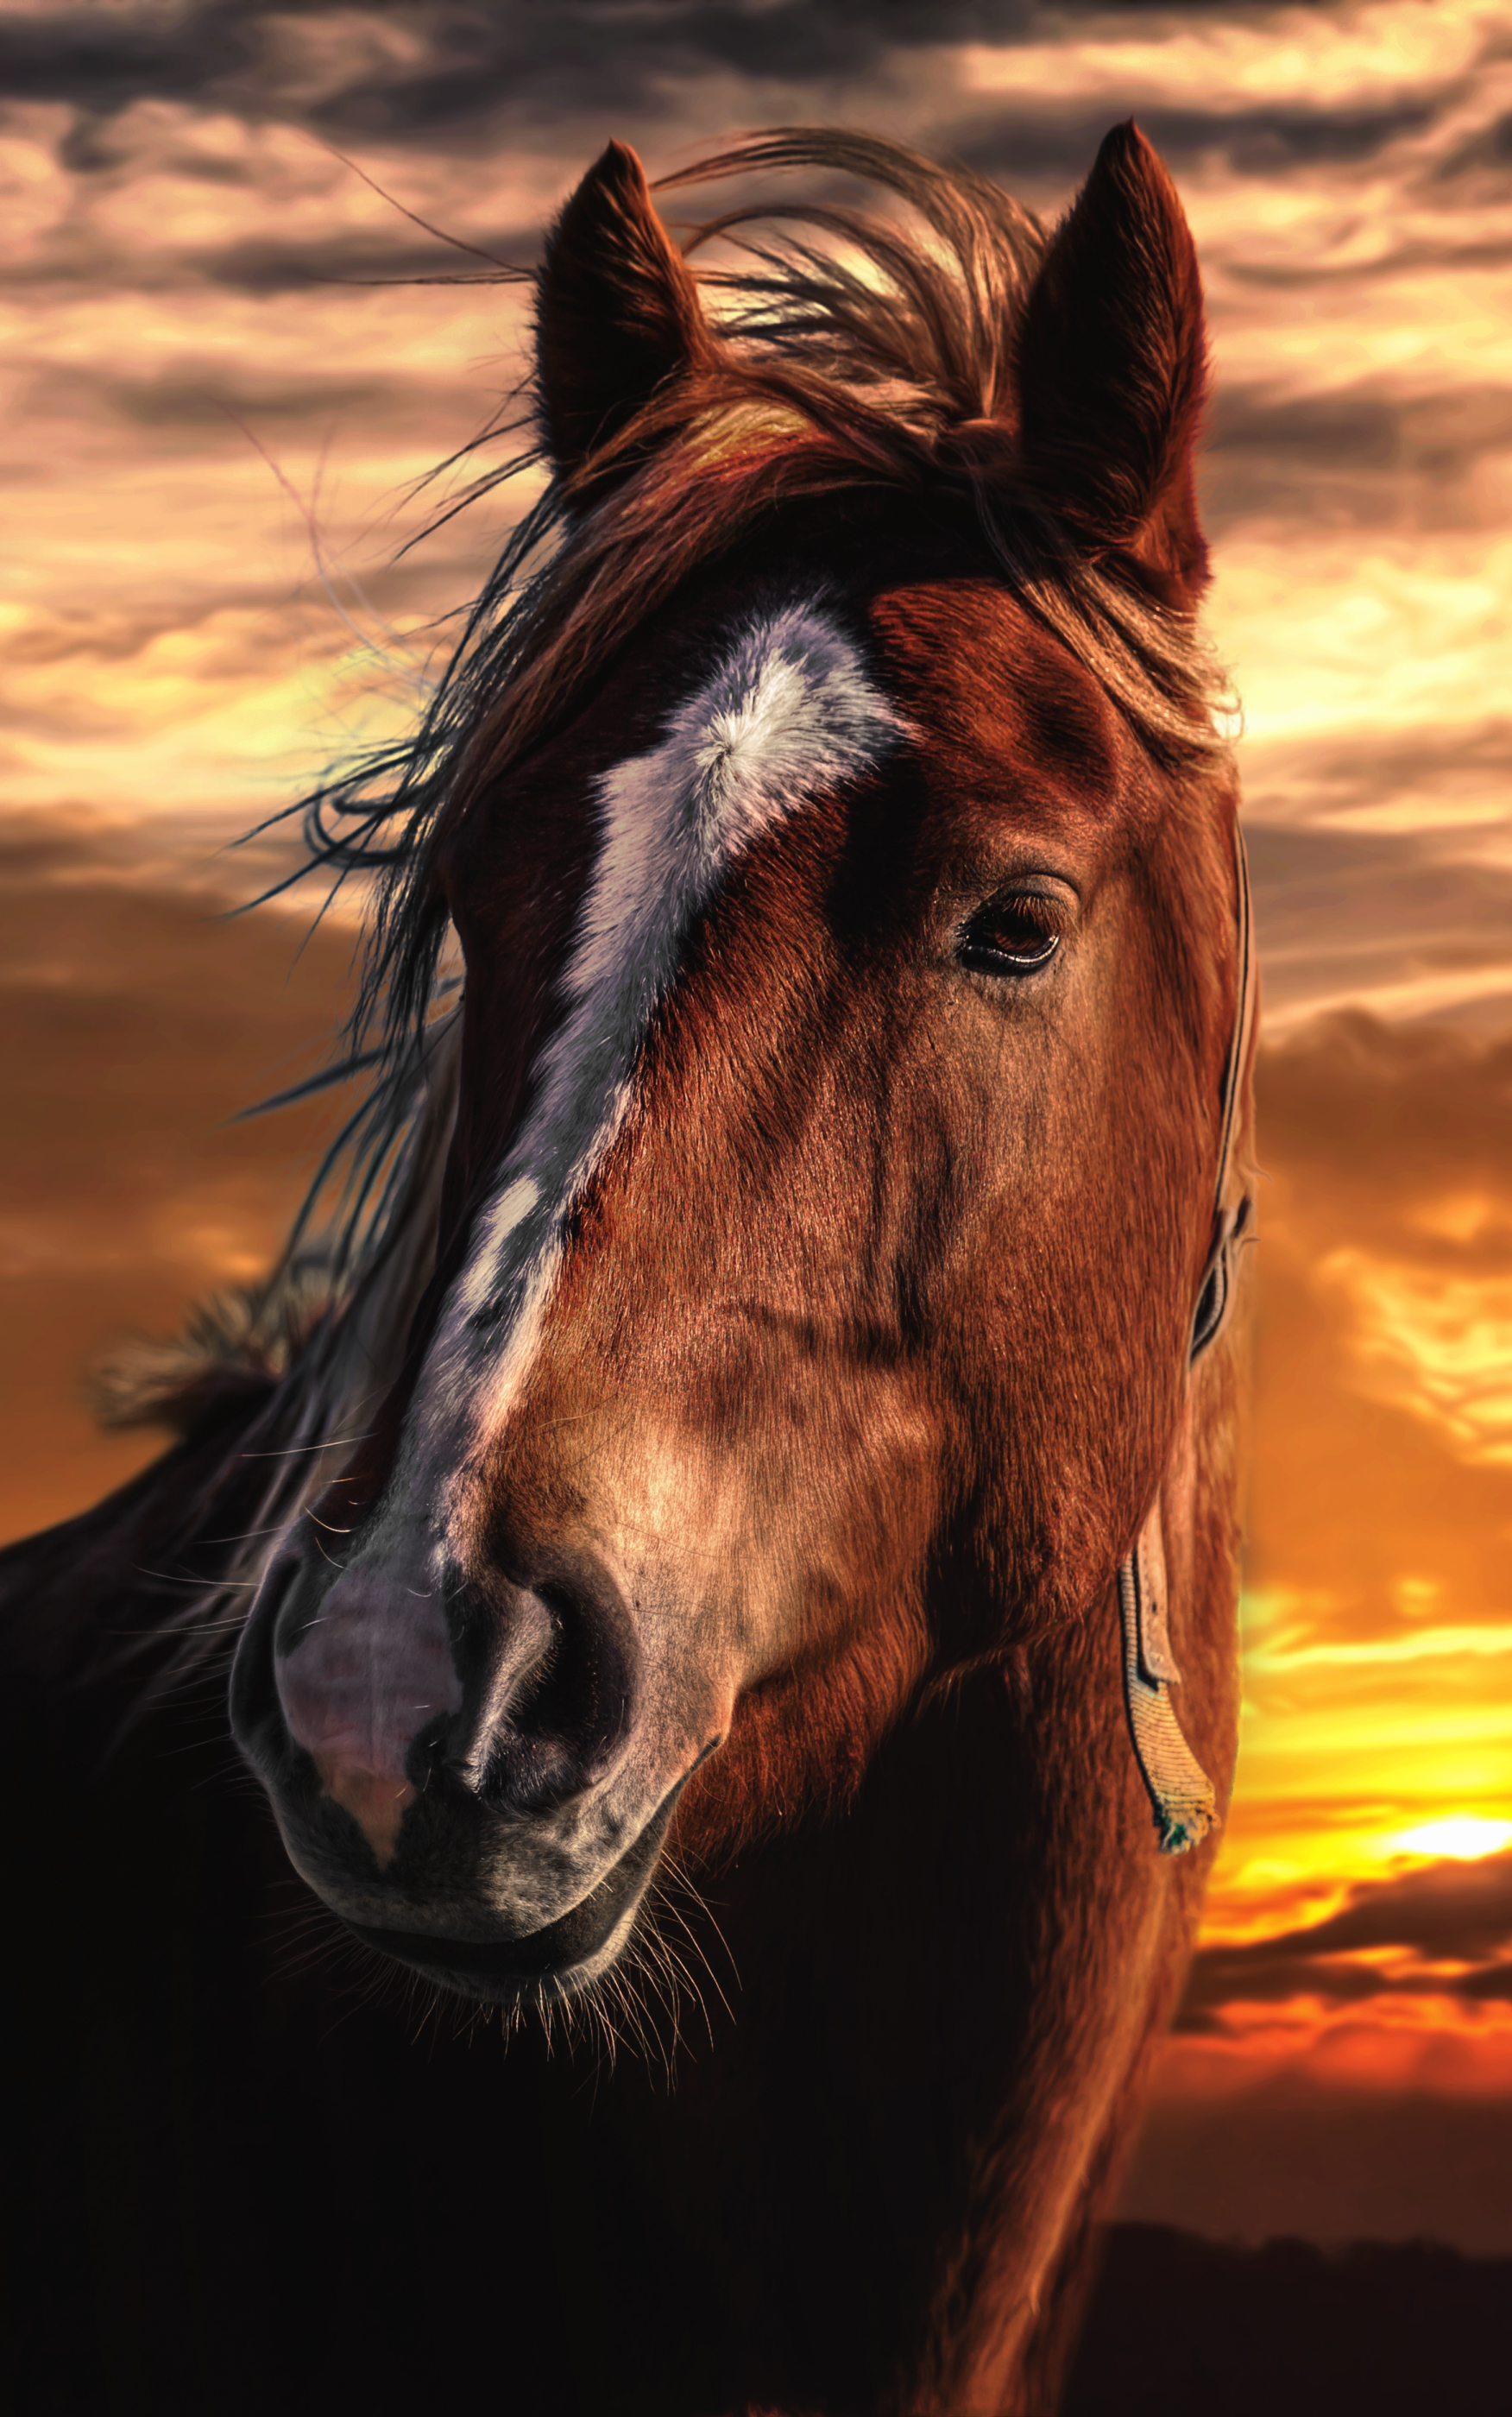 Close Up of Horse by Chris Frank